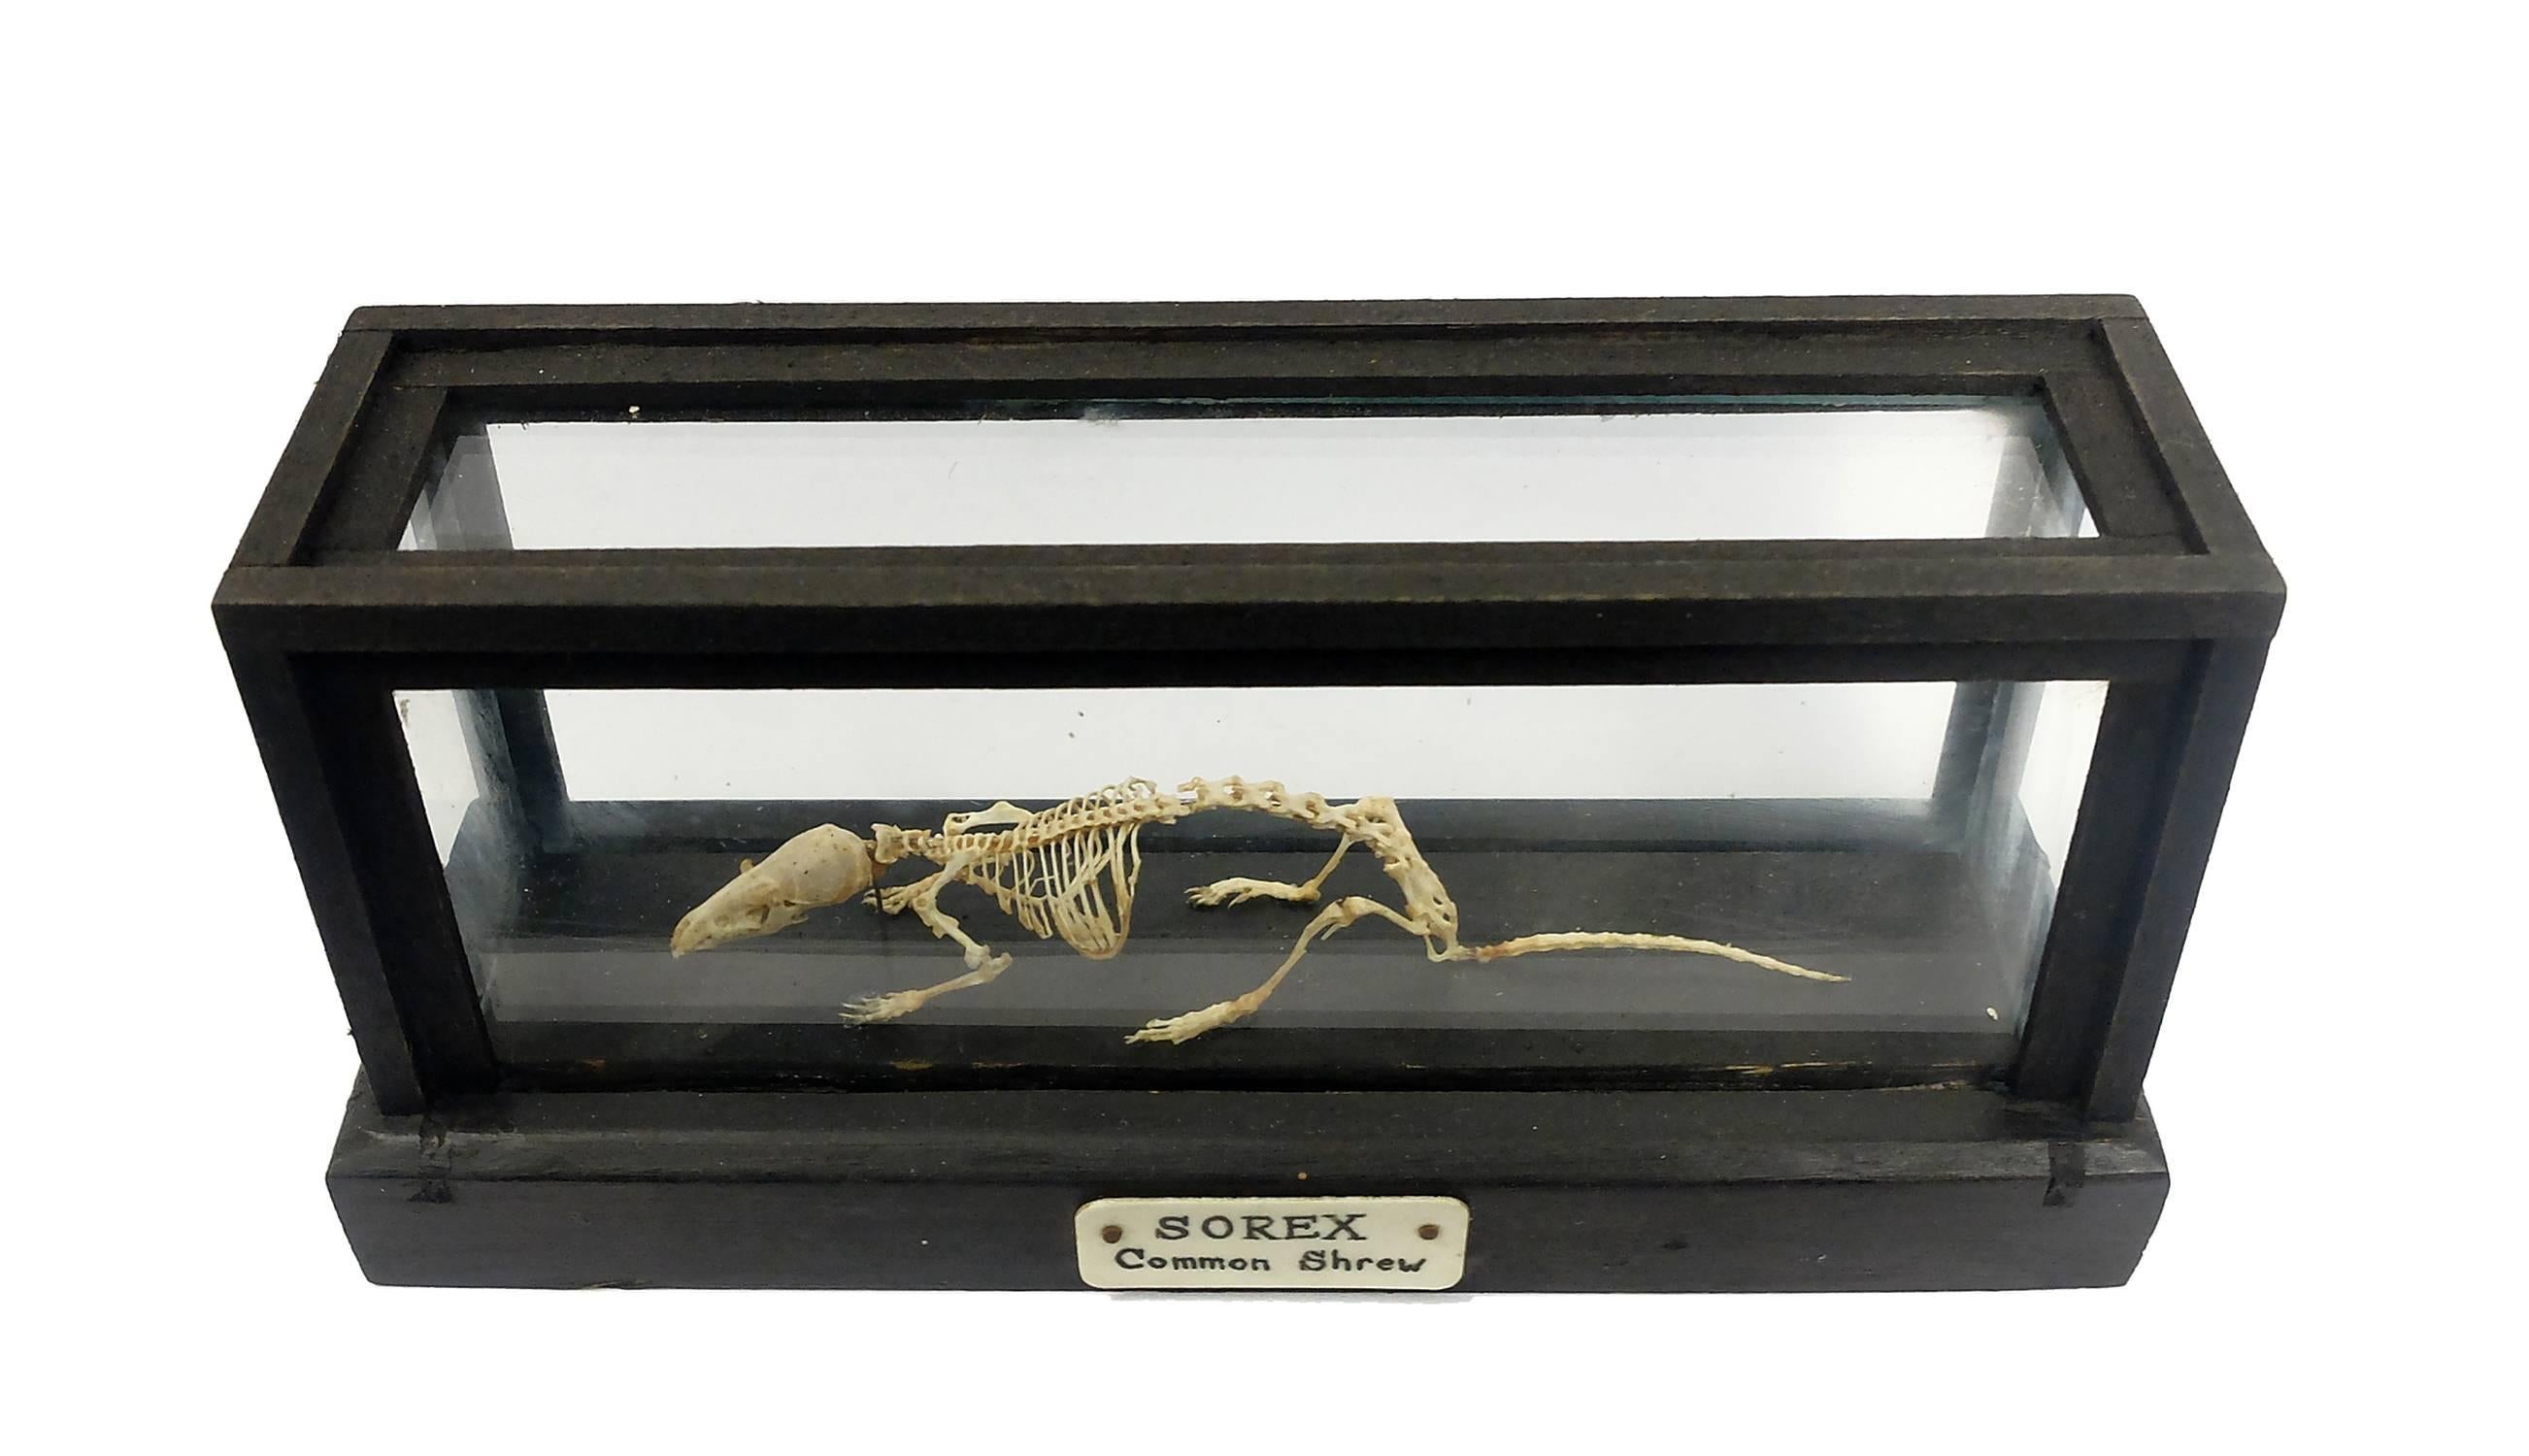 A rare natural specimen of a mouse Sorex Araneus Common Shrews skeleton for Wunderkammer. The specimen is mounted inside a wooden and glass case and wooden base.